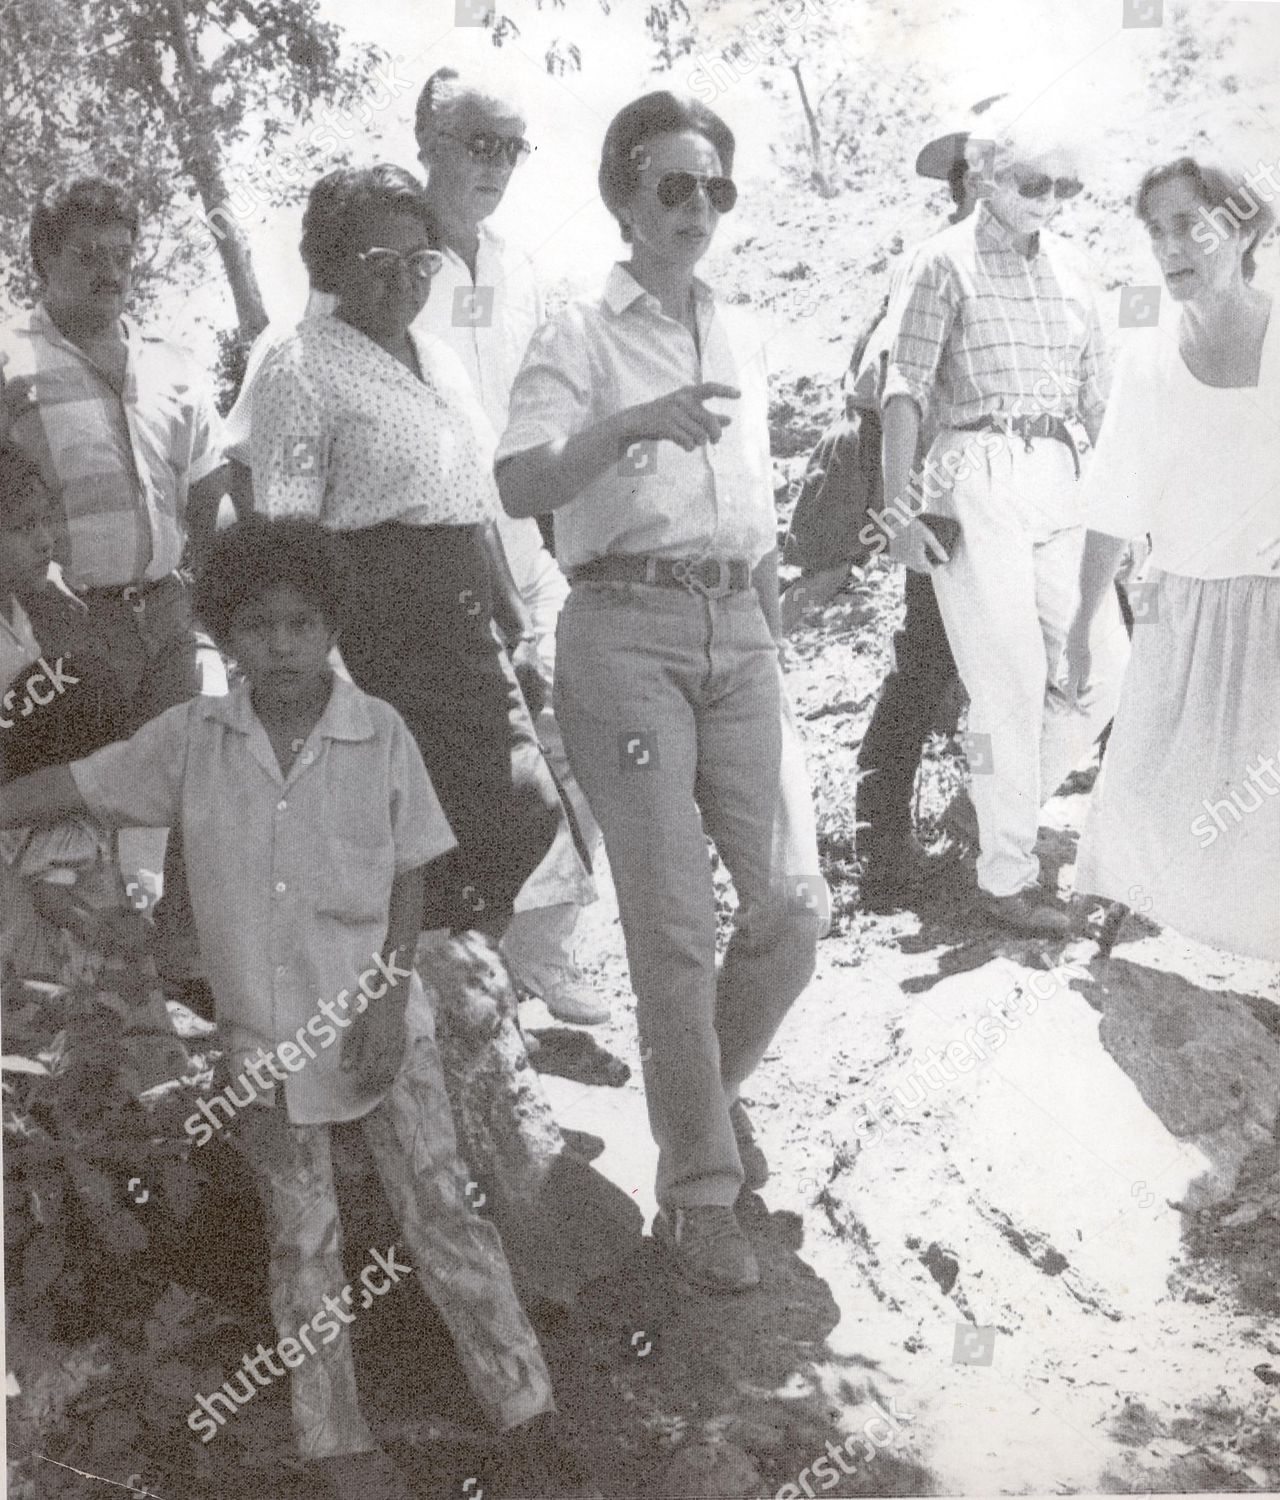 princess-anne-now-princess-royal-1988-picture-shows-princess-anne-shortly-before-scorpion-attack-with-inspector-phillip-robinson-third-left-lady-in-waiting-mary-carew-pole-second-right-in-honduras-princess-anne-came-within-seconds-of-death-w-shutterstock-editorial-1136389a.jpg